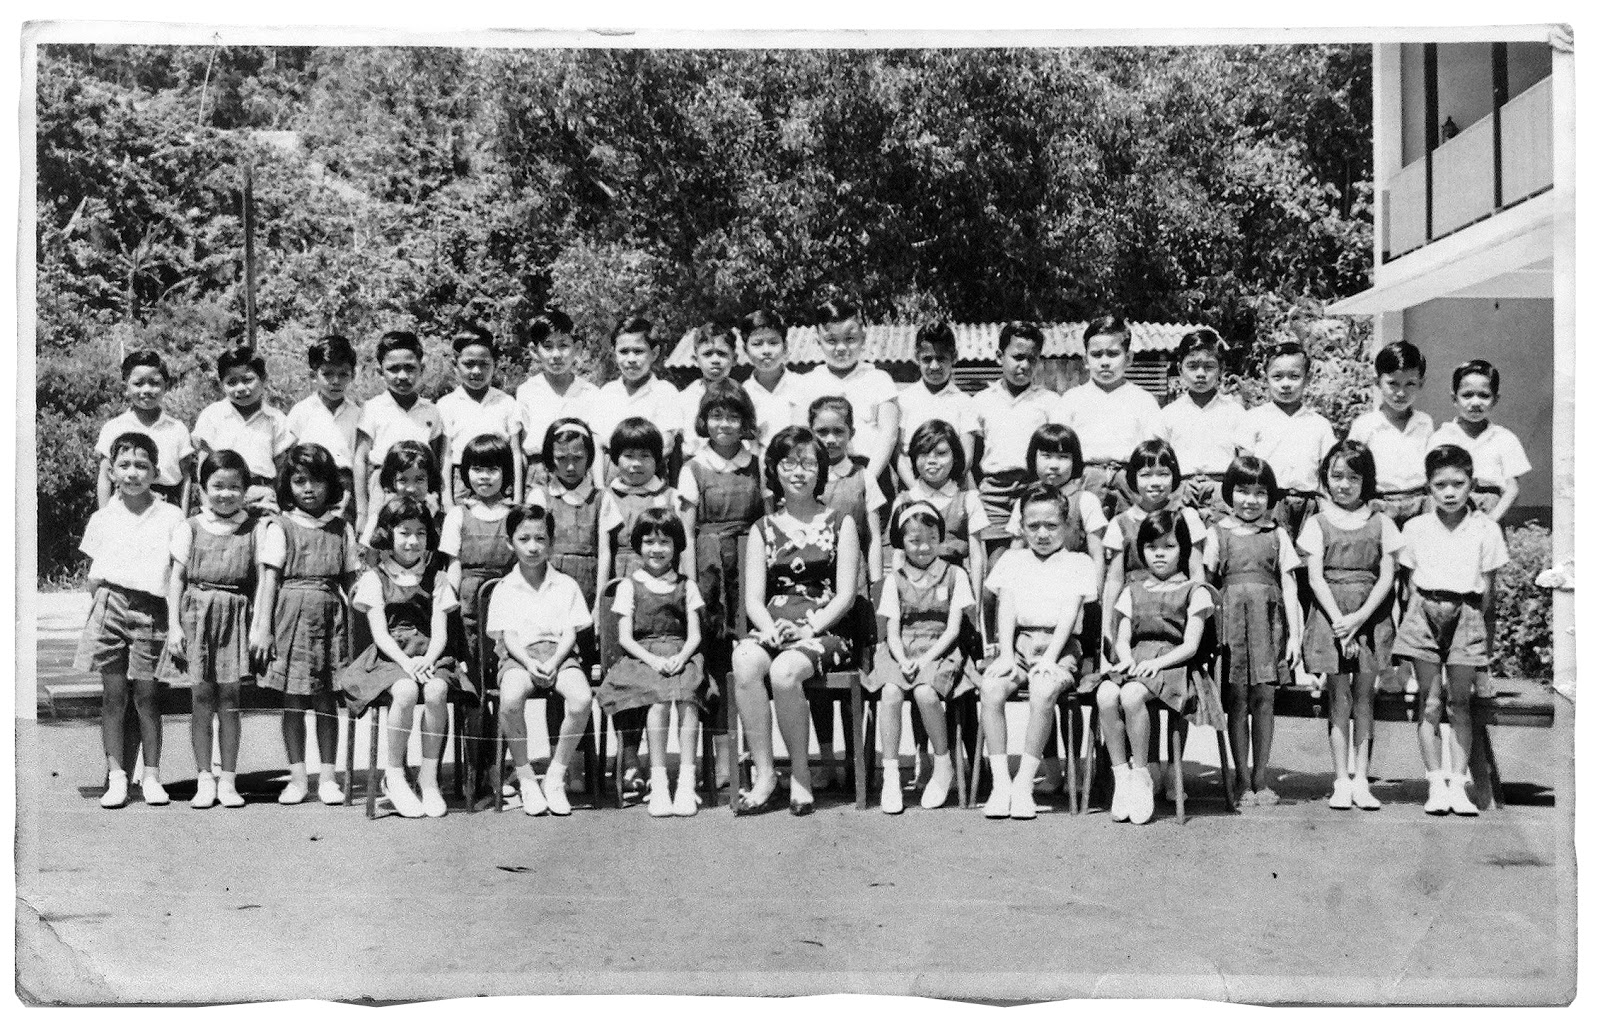 Primary 3A - 1965